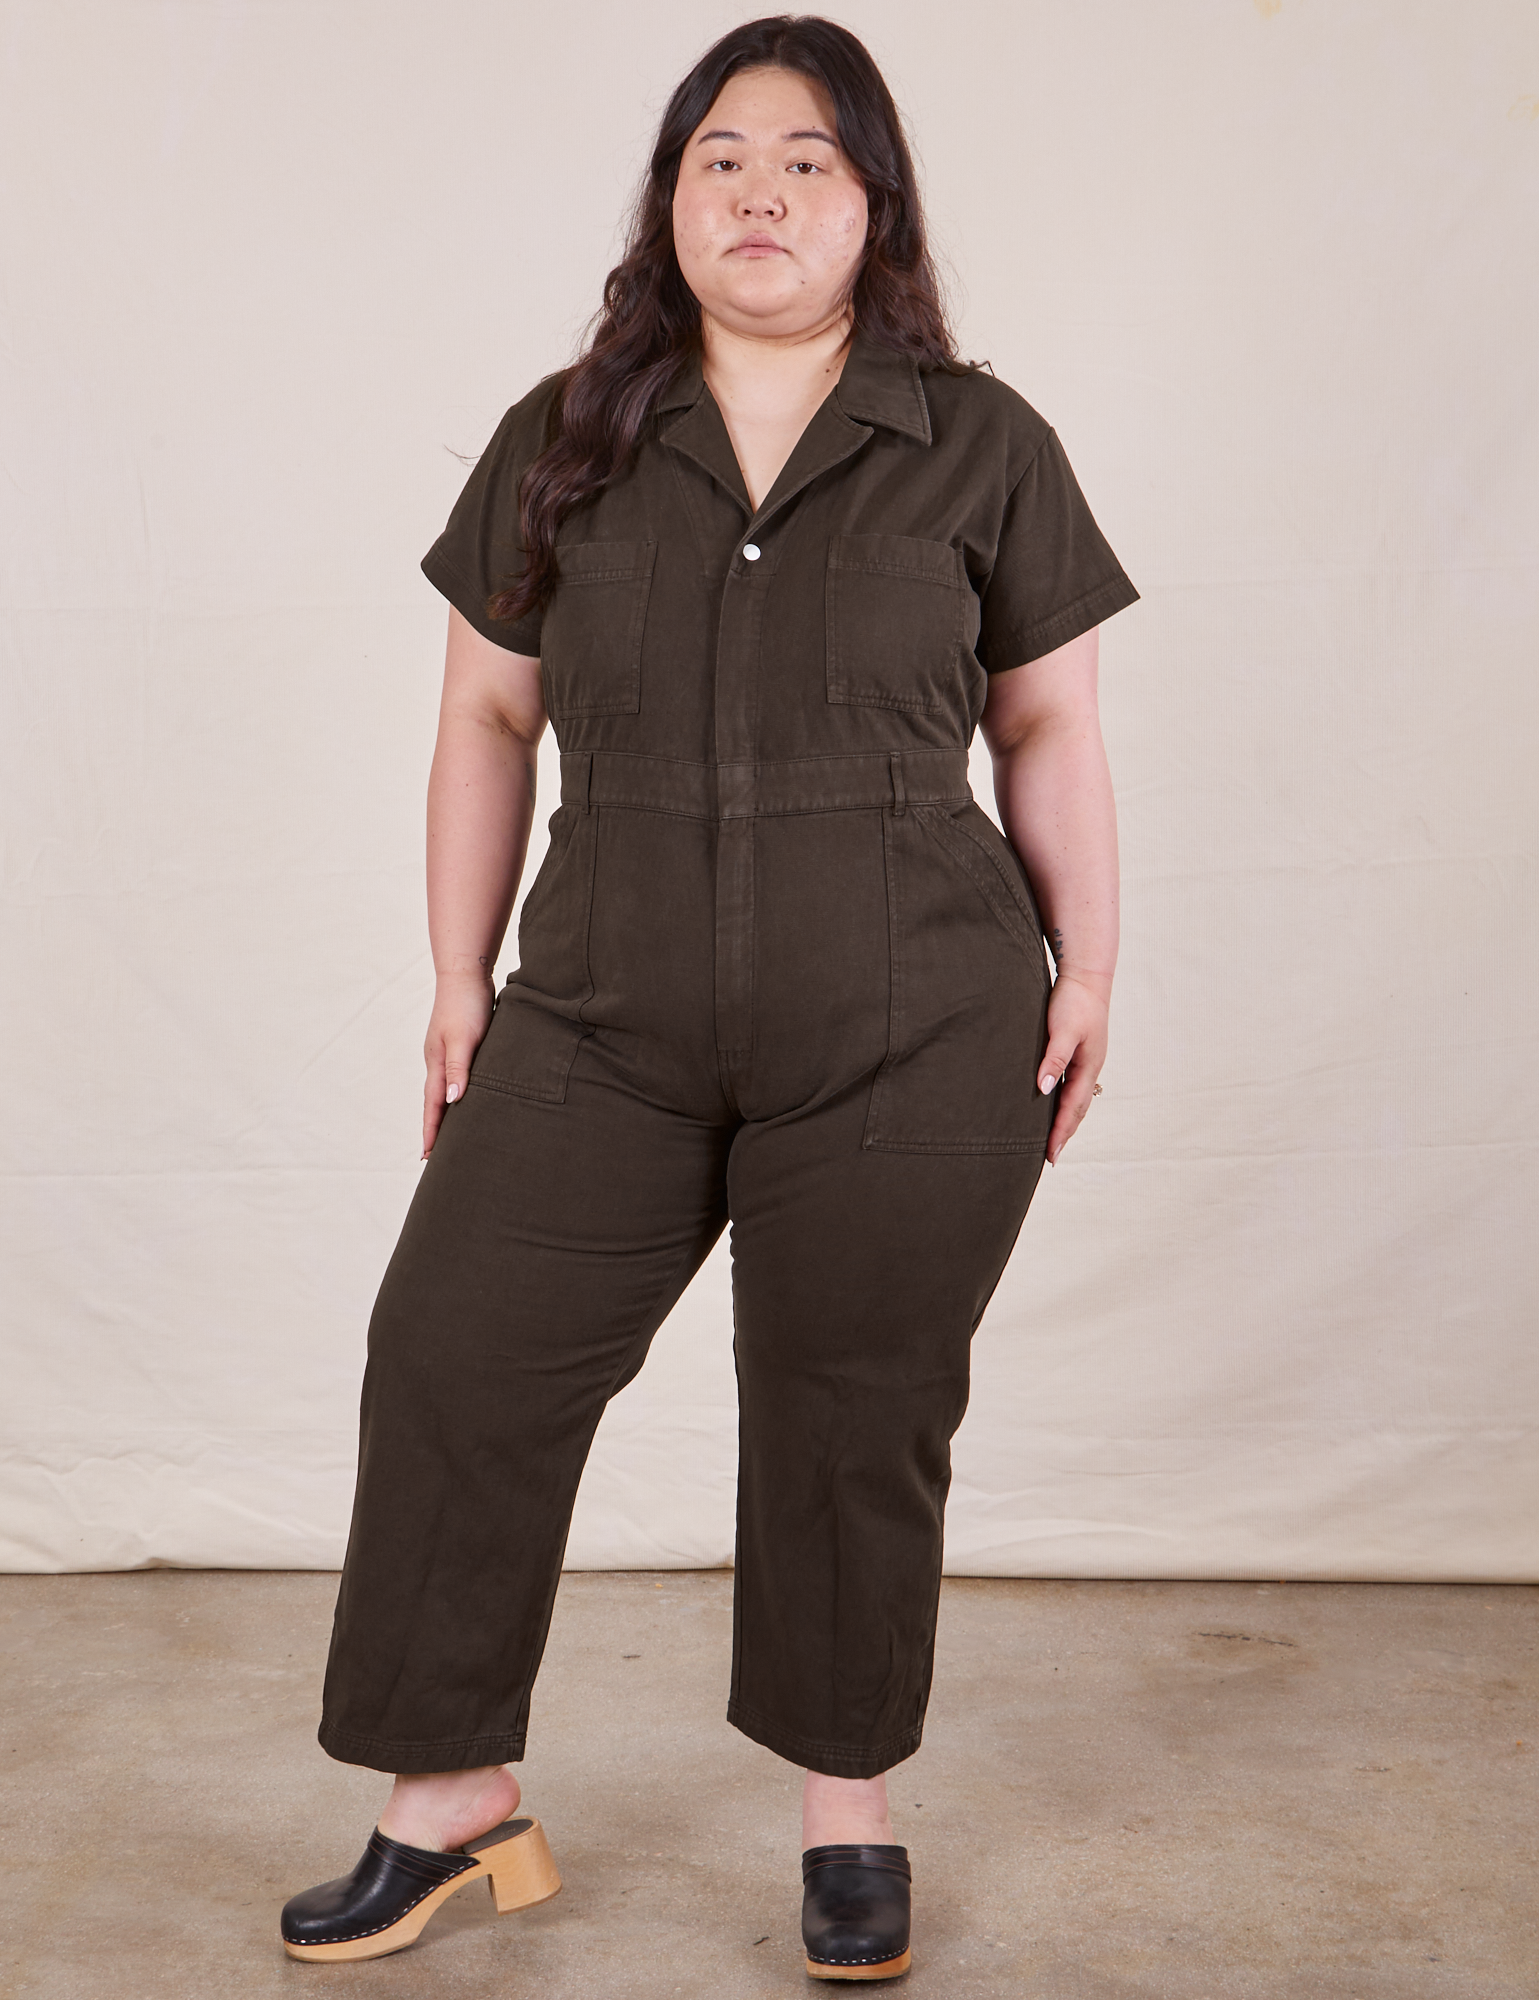 Ashley is 5’7” and wearing 1XL Petite Short Sleeve Jumpsuit in Espresso Brown